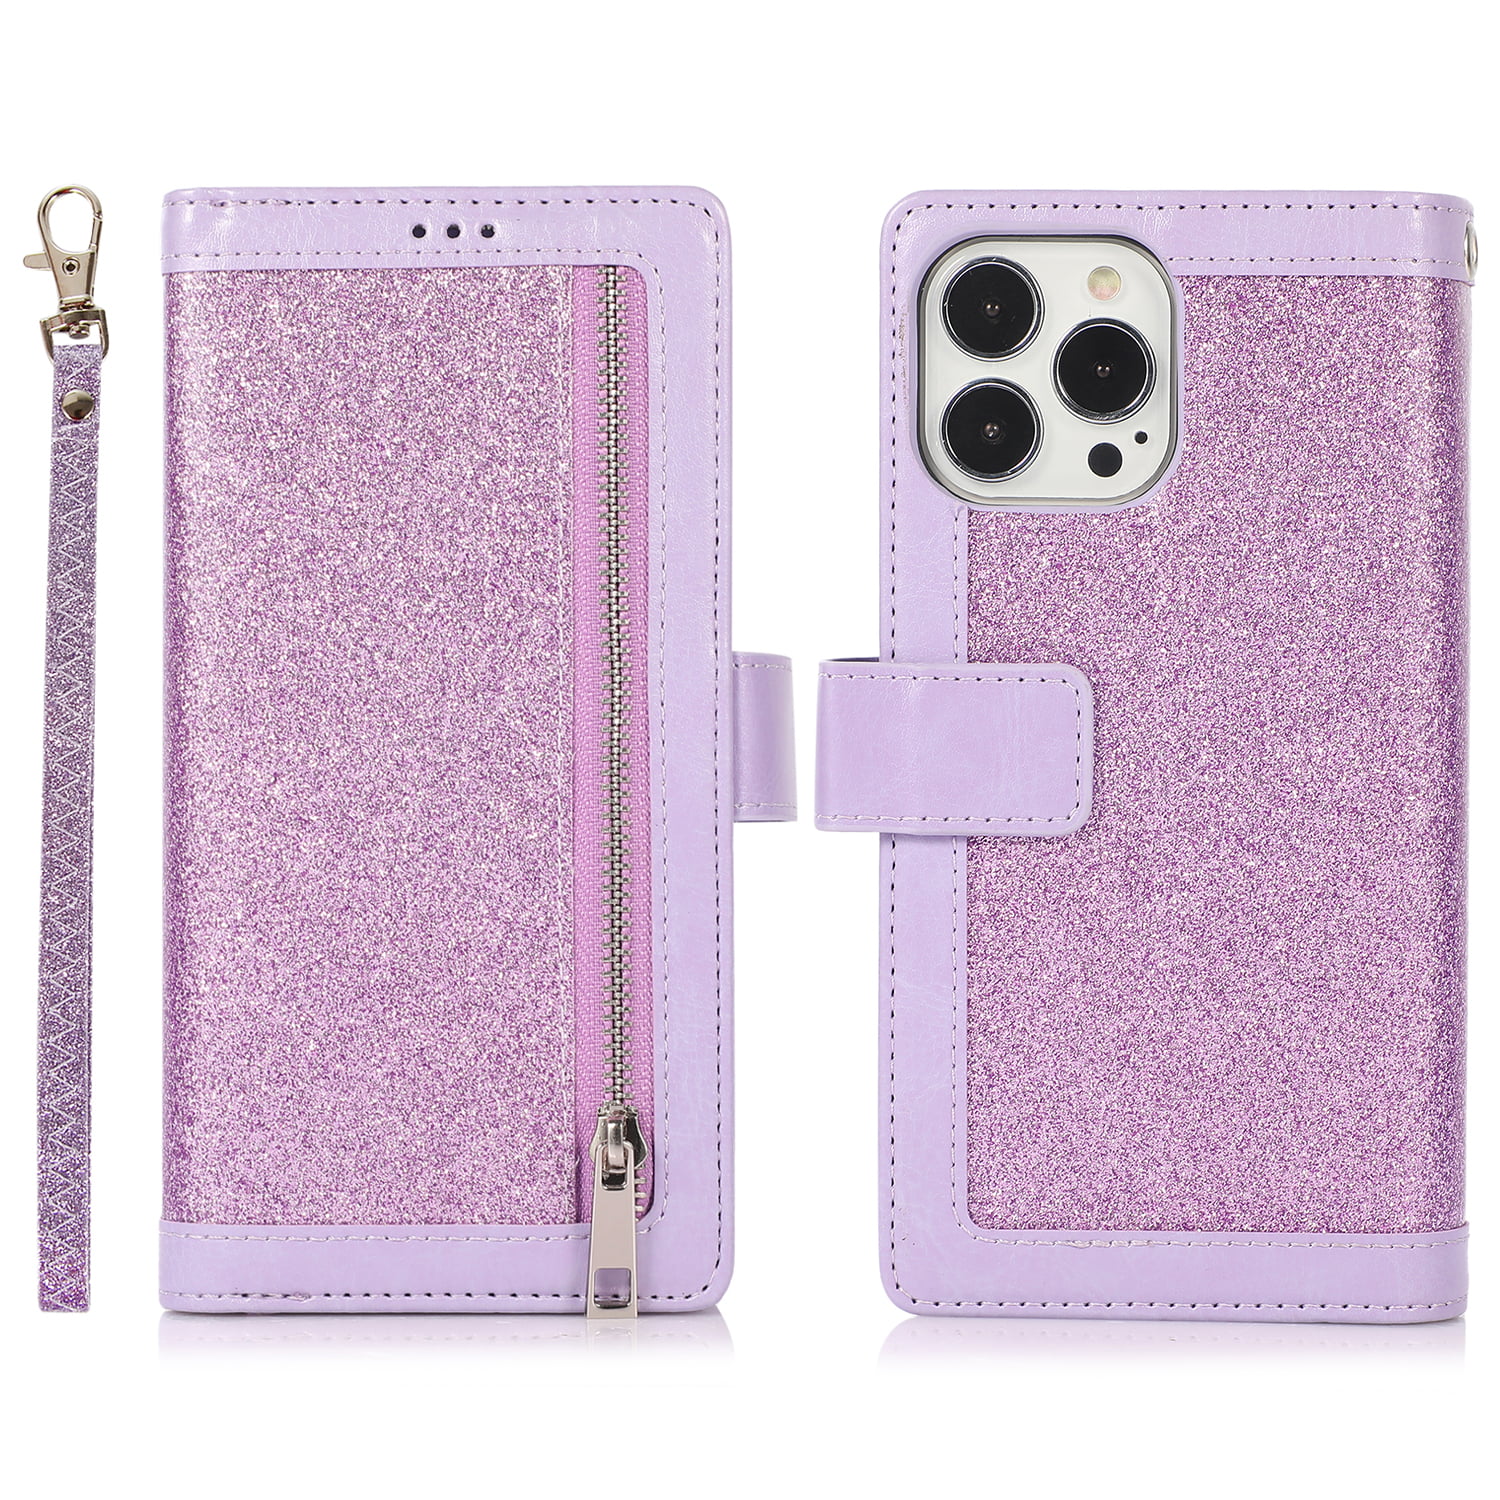 Coolwee Compatible iPhone 13 Wallet Case Flip Folio Cover with Card Slots Kickstand Design Wrist Strap Girls Women Glitter PU Leather Compatible with Apple iPhone 13 Shiny Sparkle Rose Gold Pink 